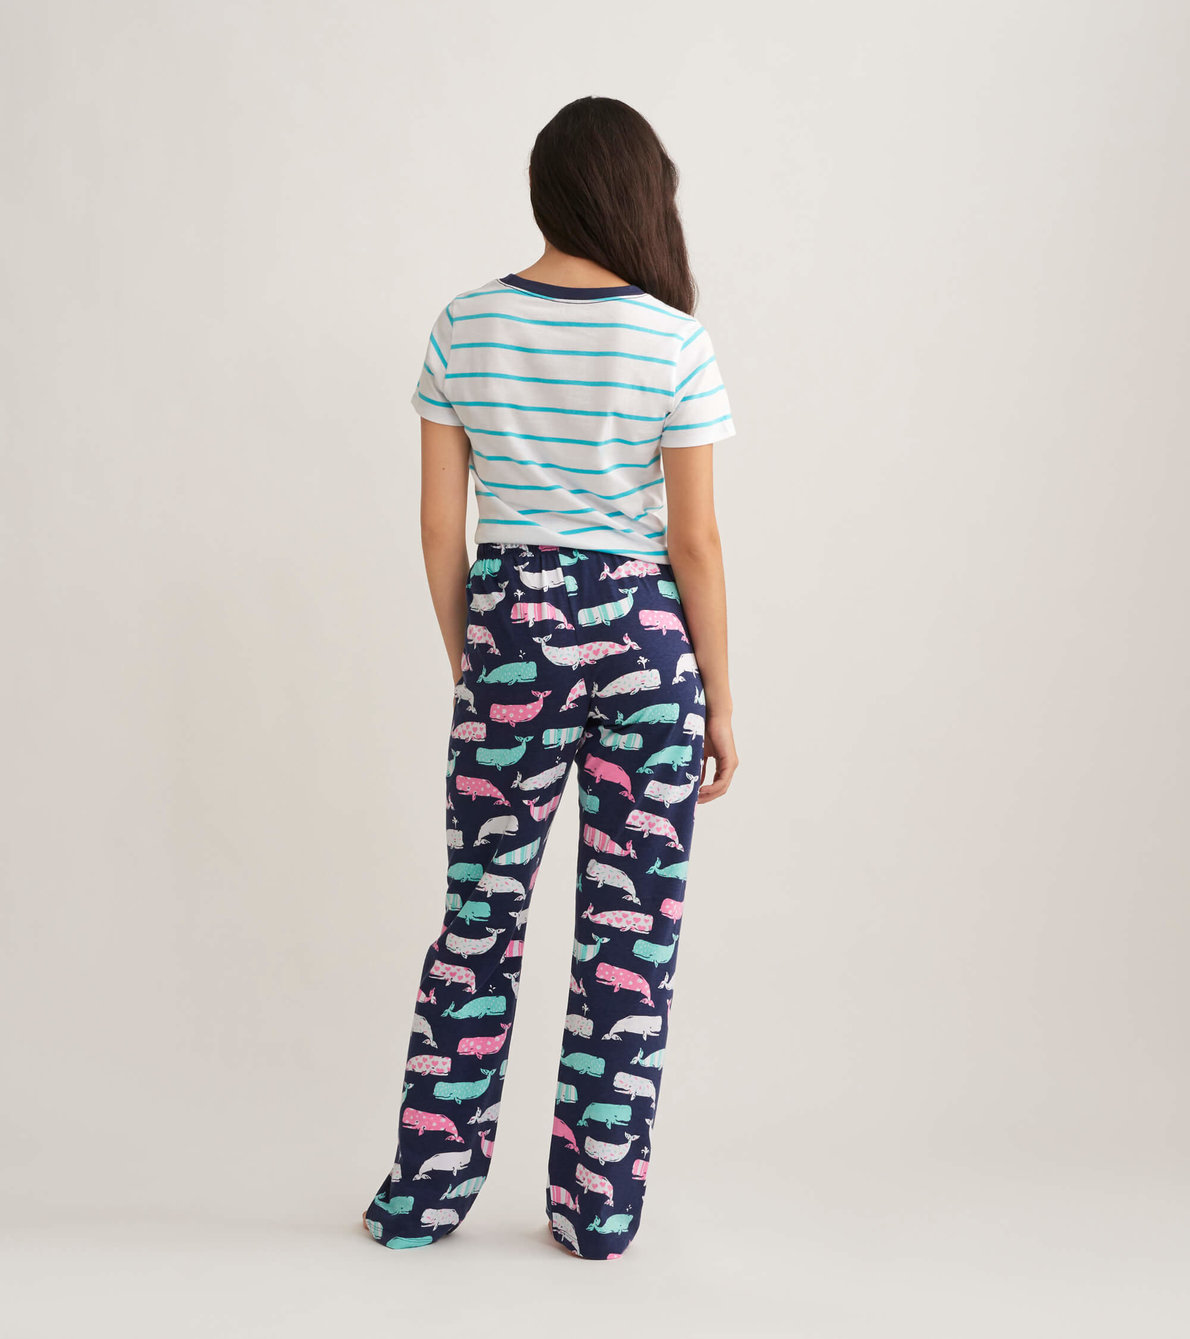 View larger image of Nautical Whales Women's Jersey Pajama Pants